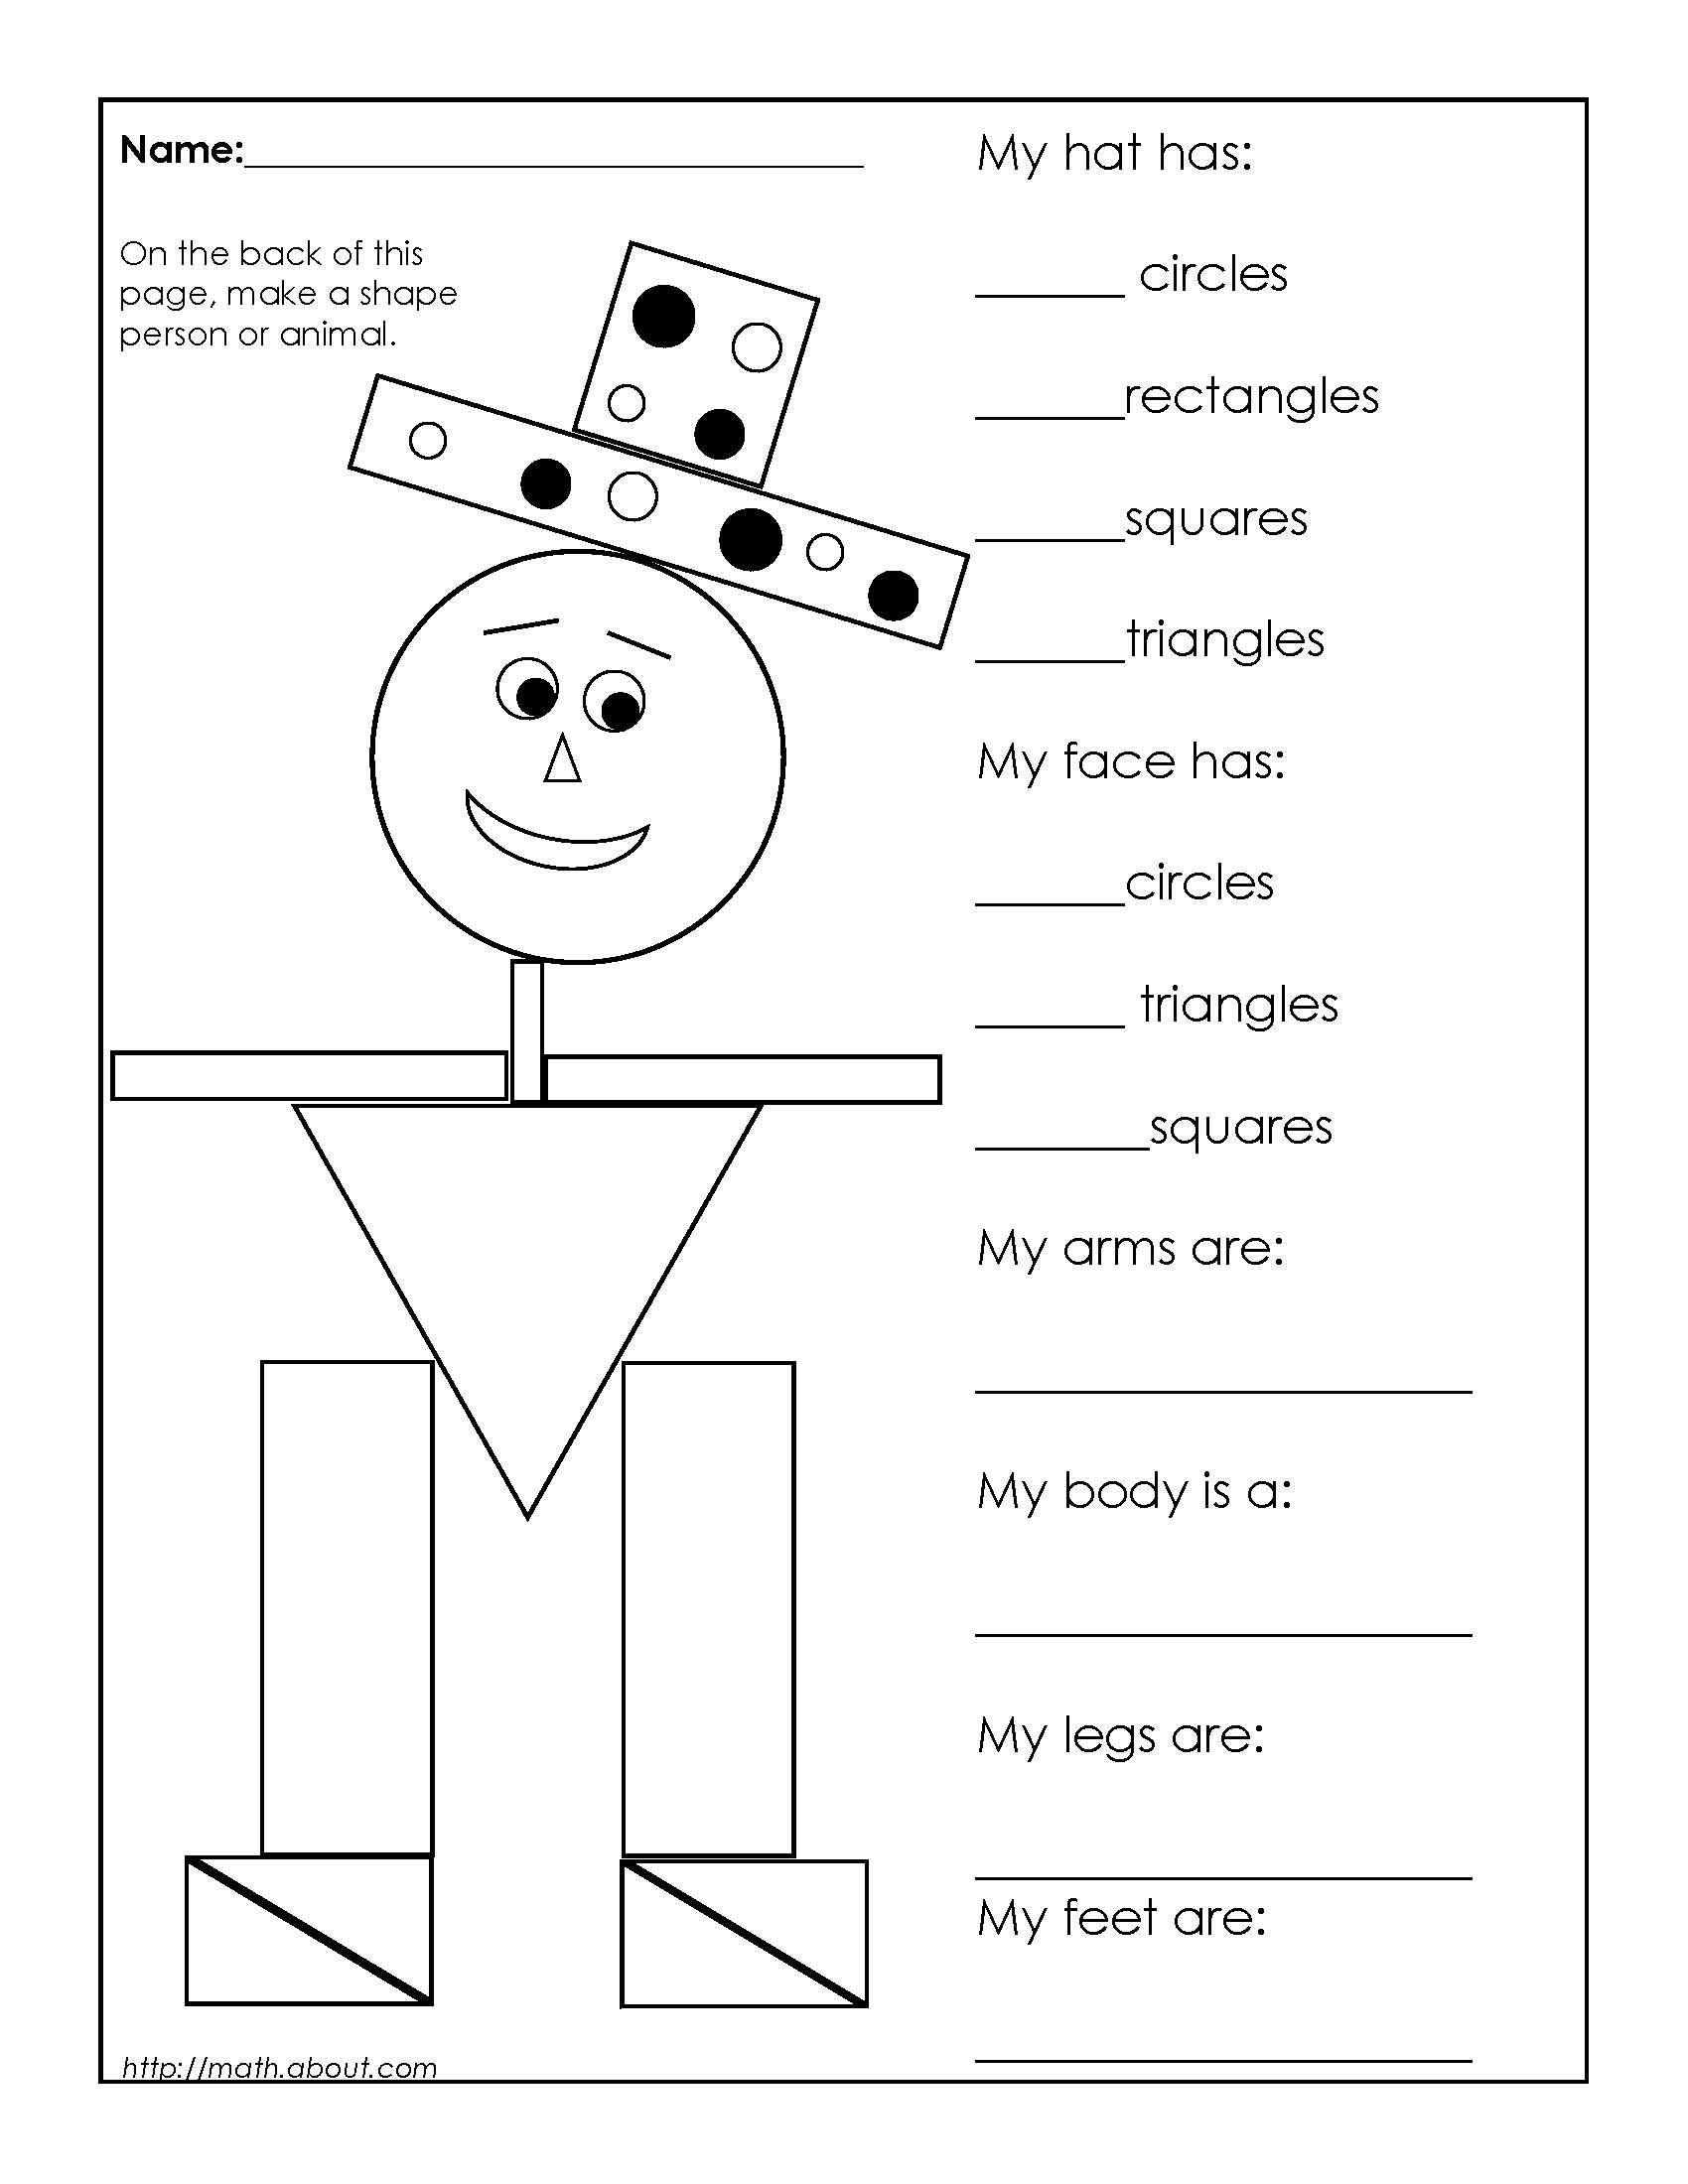 Geometry Parallelogram Worksheet Answers with Diagram Math Problems Unique 1st Grade Geometry Worksheets for